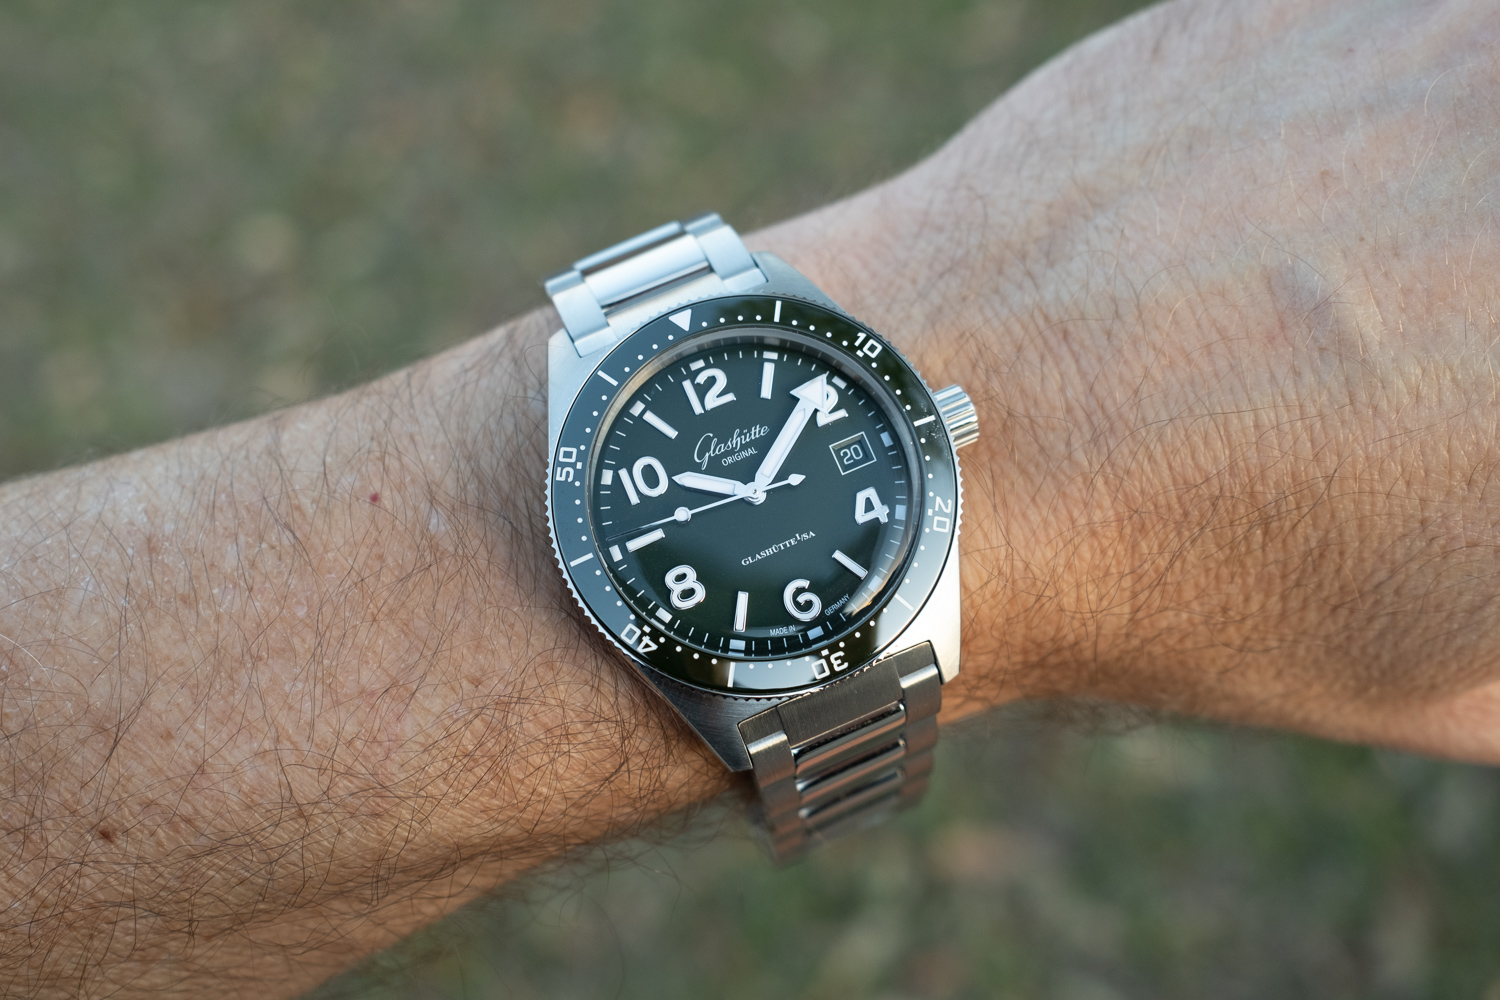 Glashütte Original SeaQ in Reed Green with bright lume. Picture credit: Scott Sitkiewitz